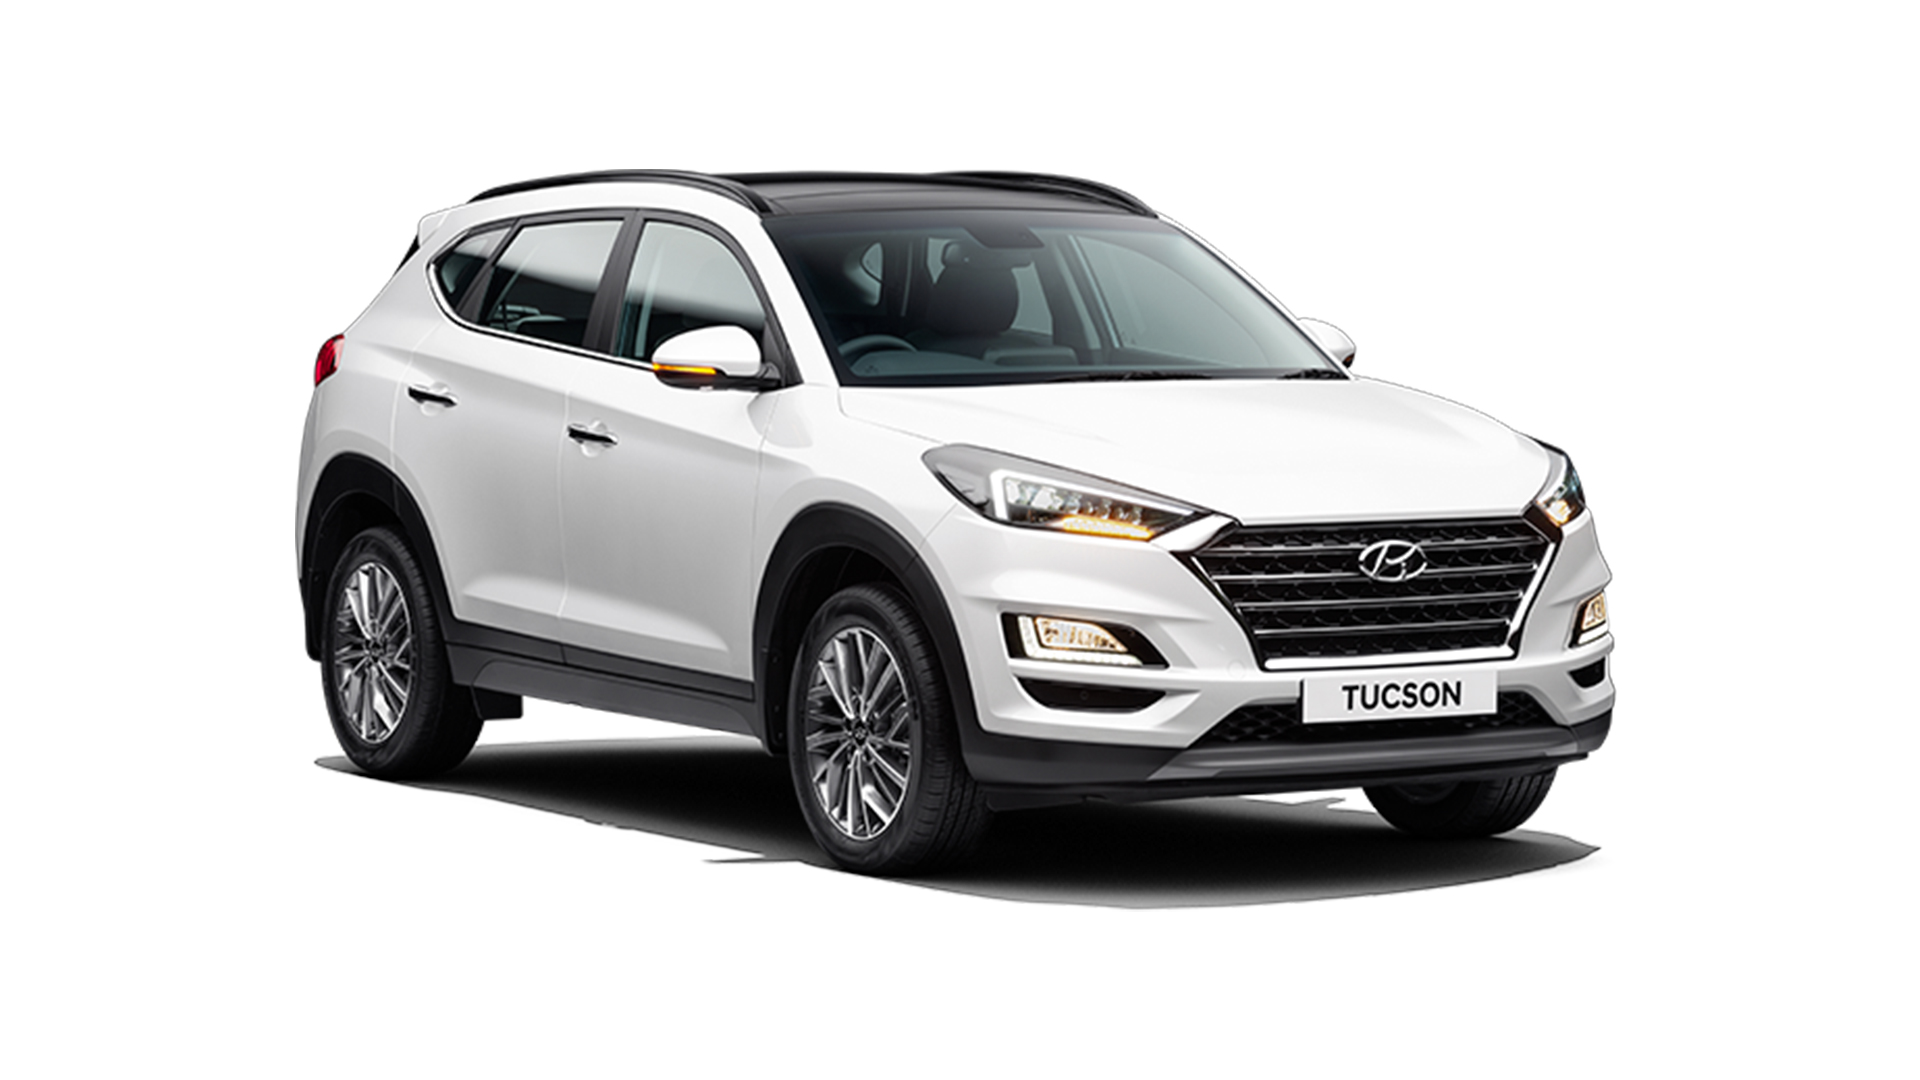 Blue hybrid 4dr suv awd (1.6l 4cyl turbo gas/electric hybrid 6a) which starts at $29,350; Hyundai Tucson 2020 Price Mileage Reviews Specification Gallery Overdrive